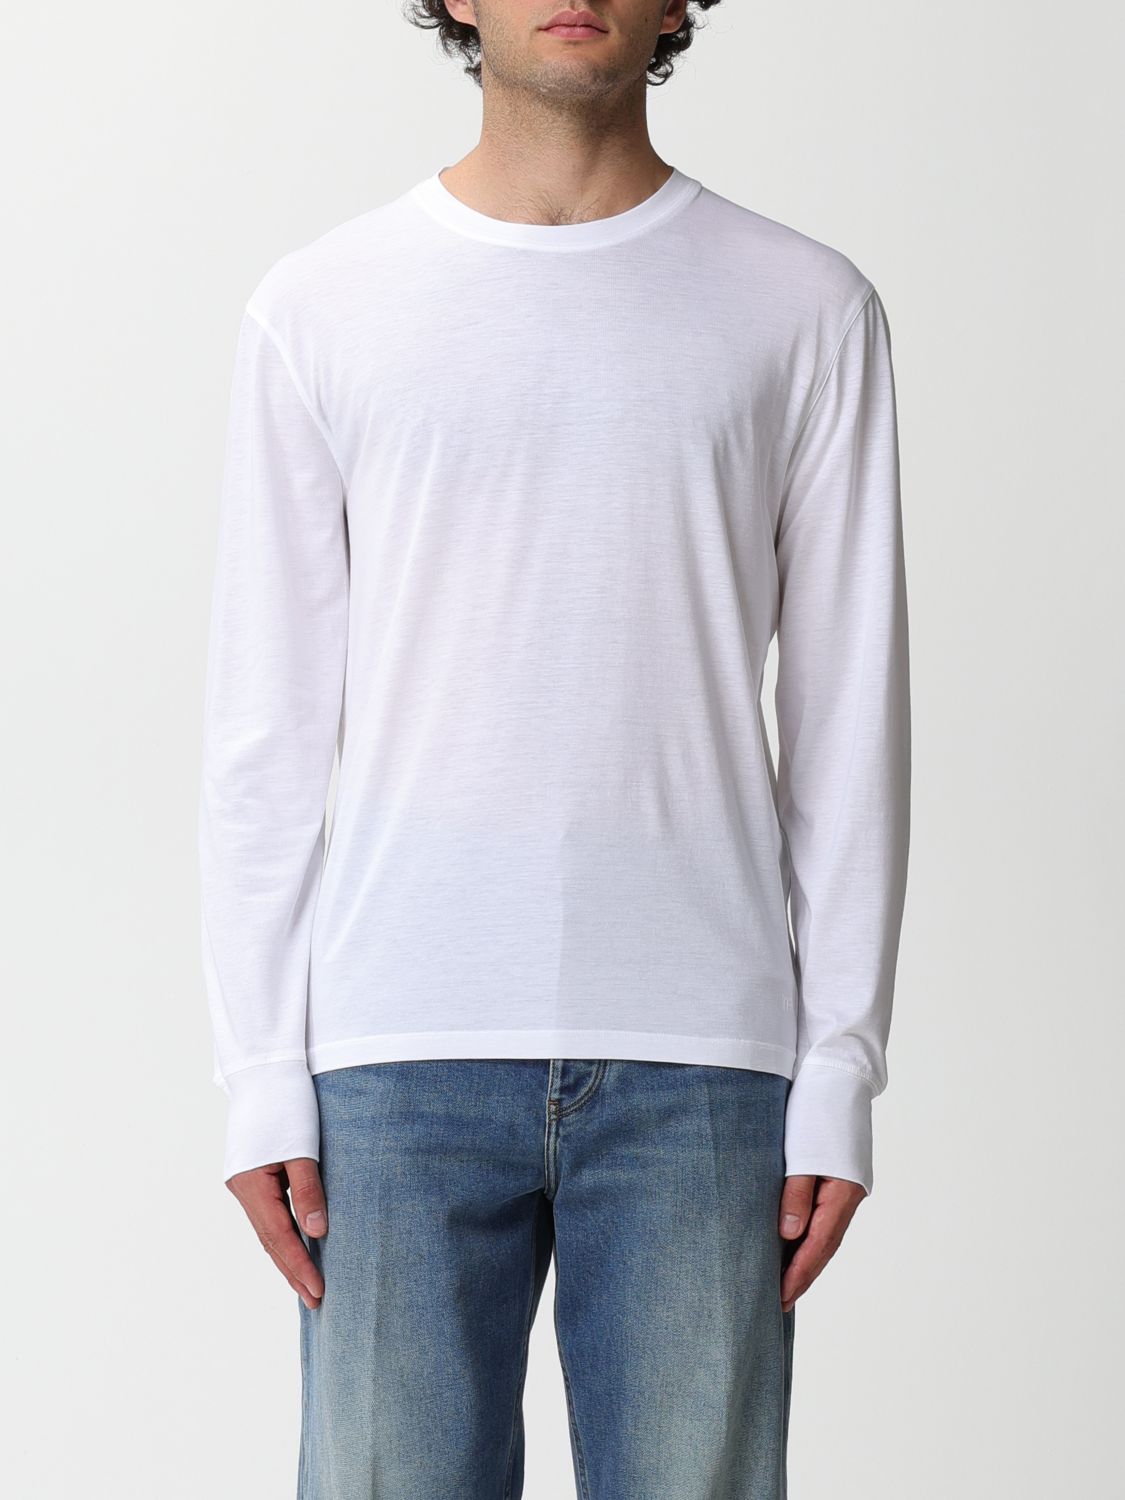 TOM FORD T-SHIRT IN LYOCELL AND COTTON,E49243001